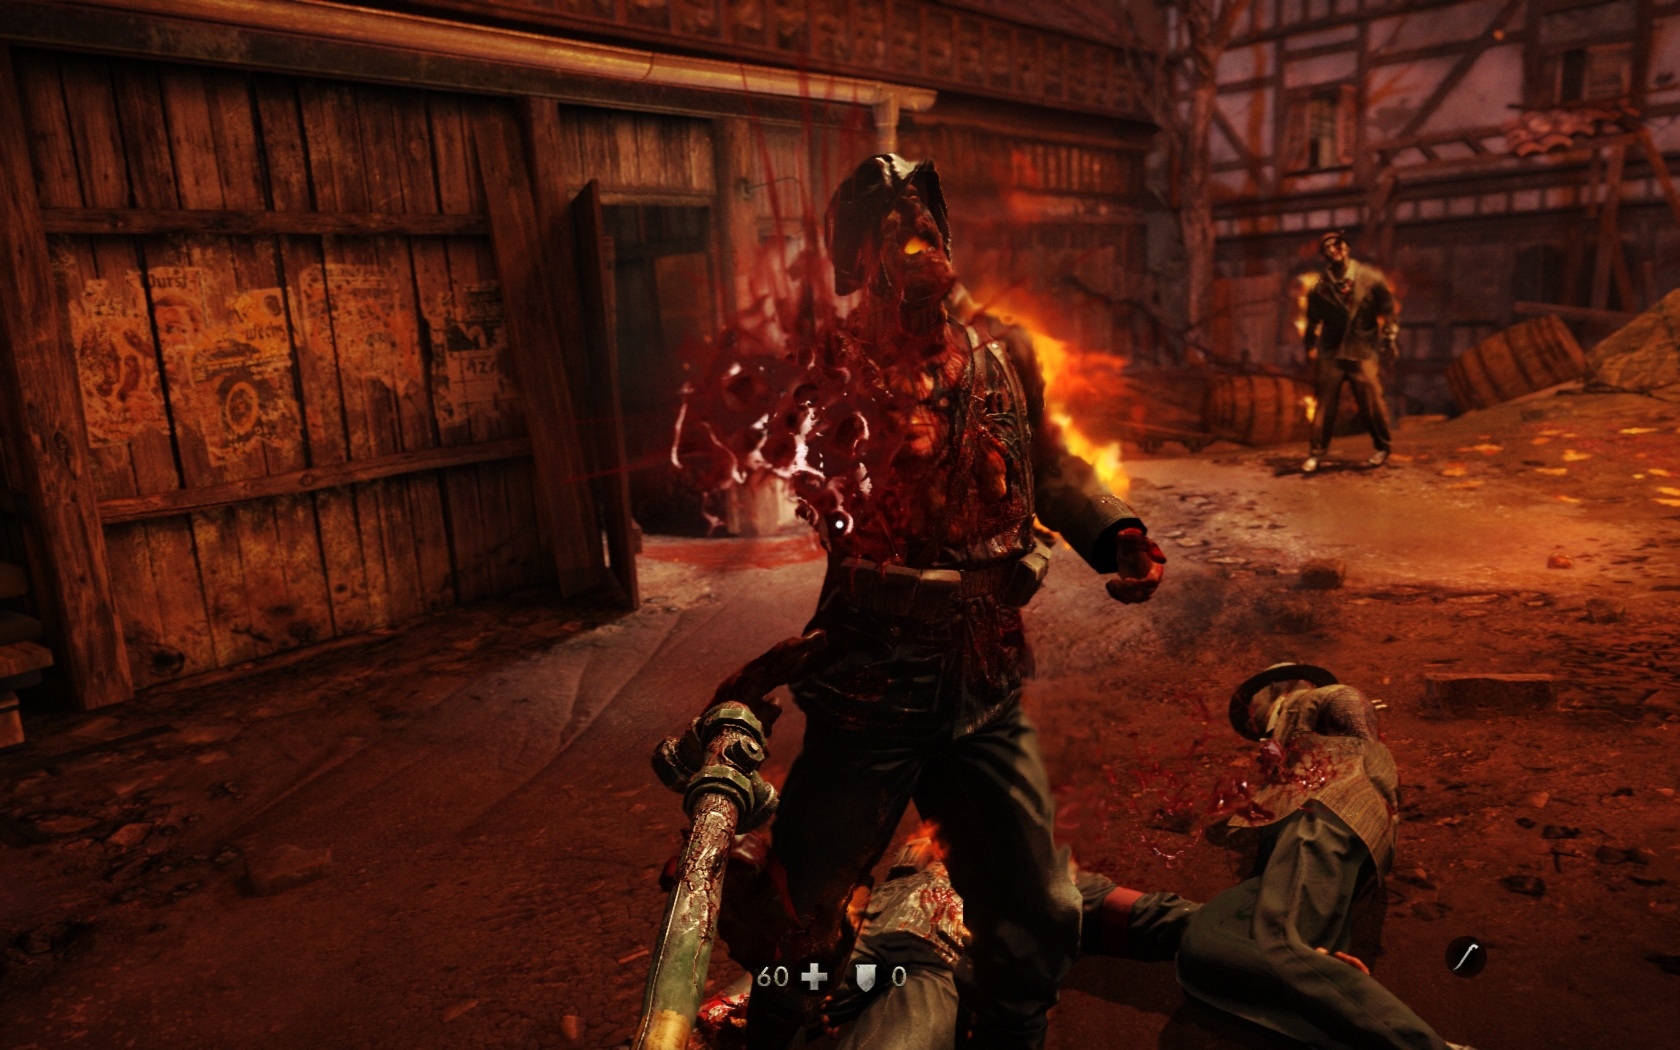 Wolfenstein: The Old Blood Prv as hry je laden technologicky, druh paranormlne.